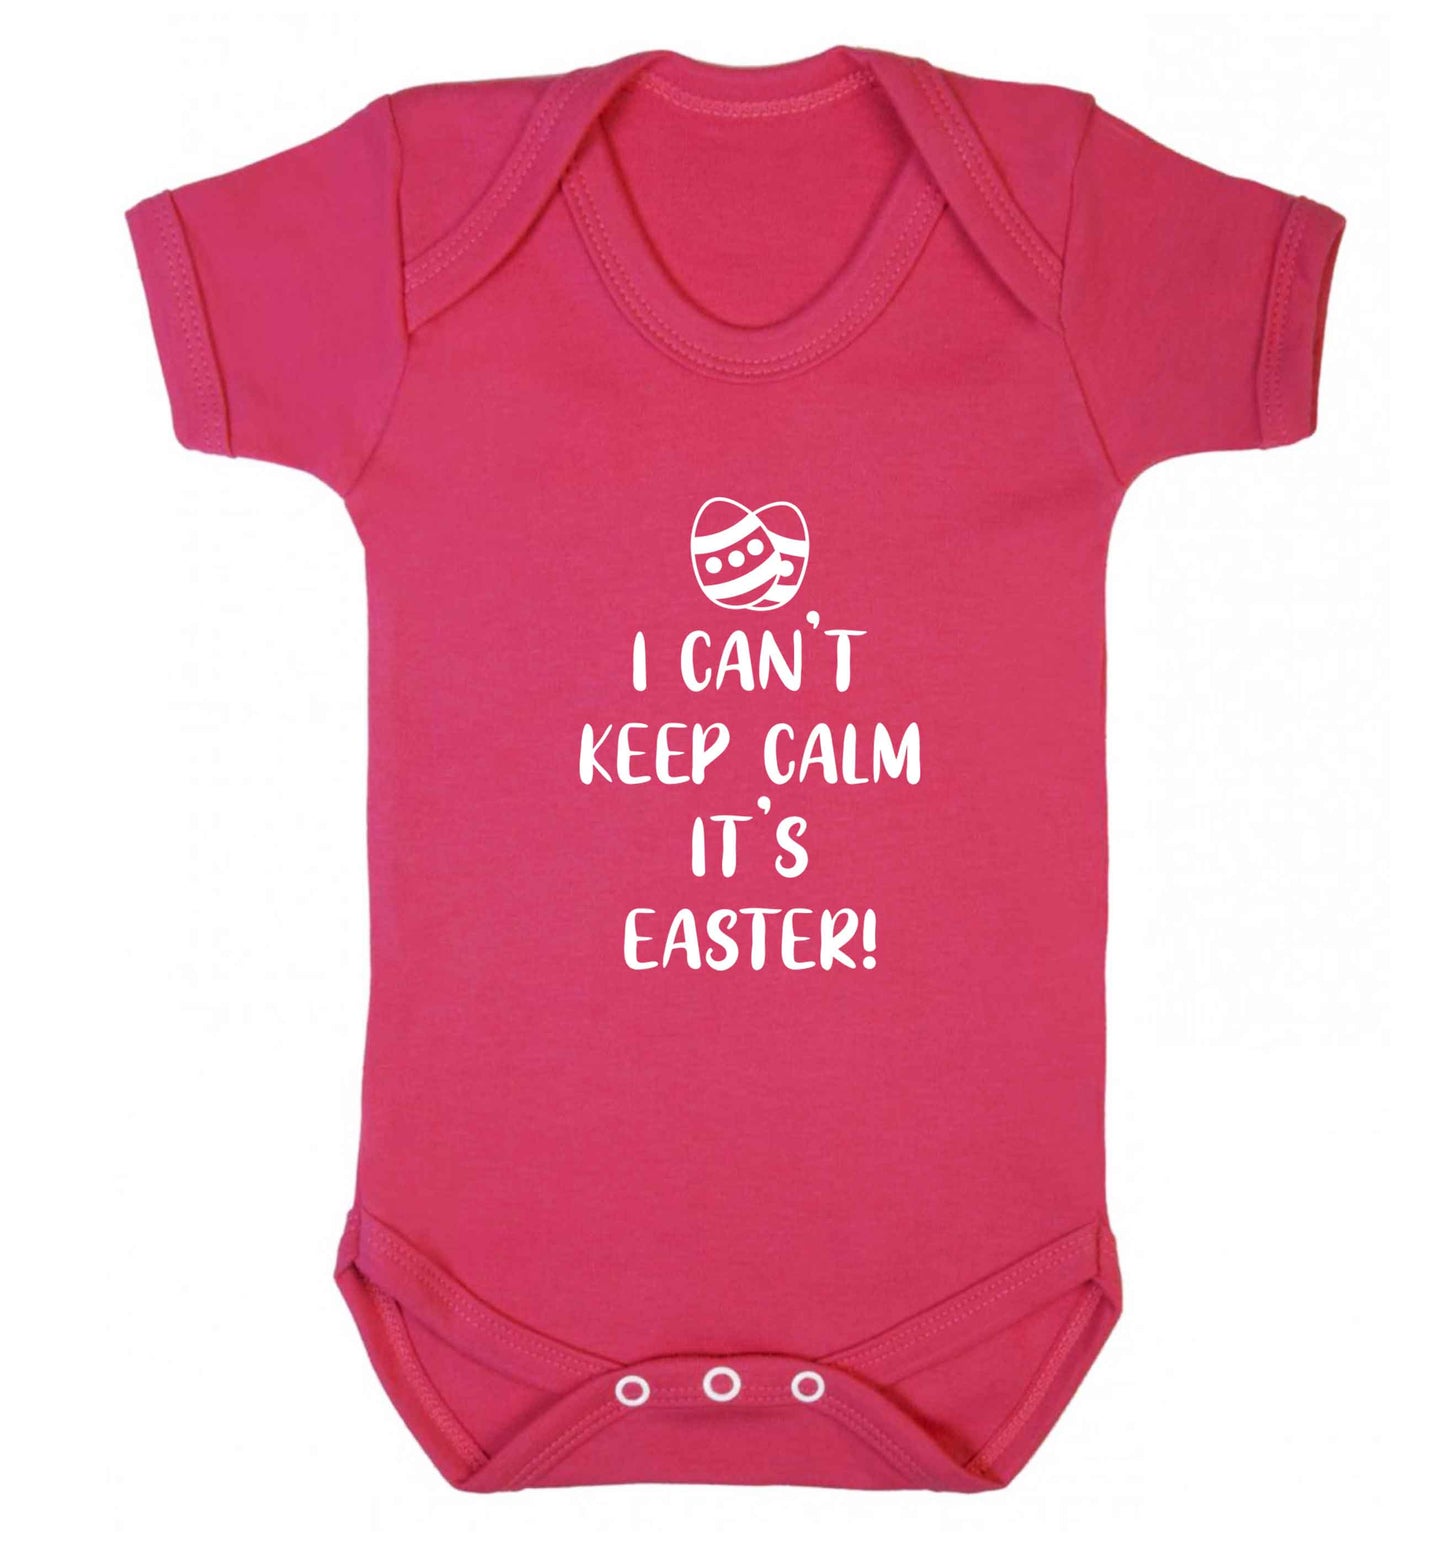 I can't keep calm it's Easter baby vest dark pink 18-24 months